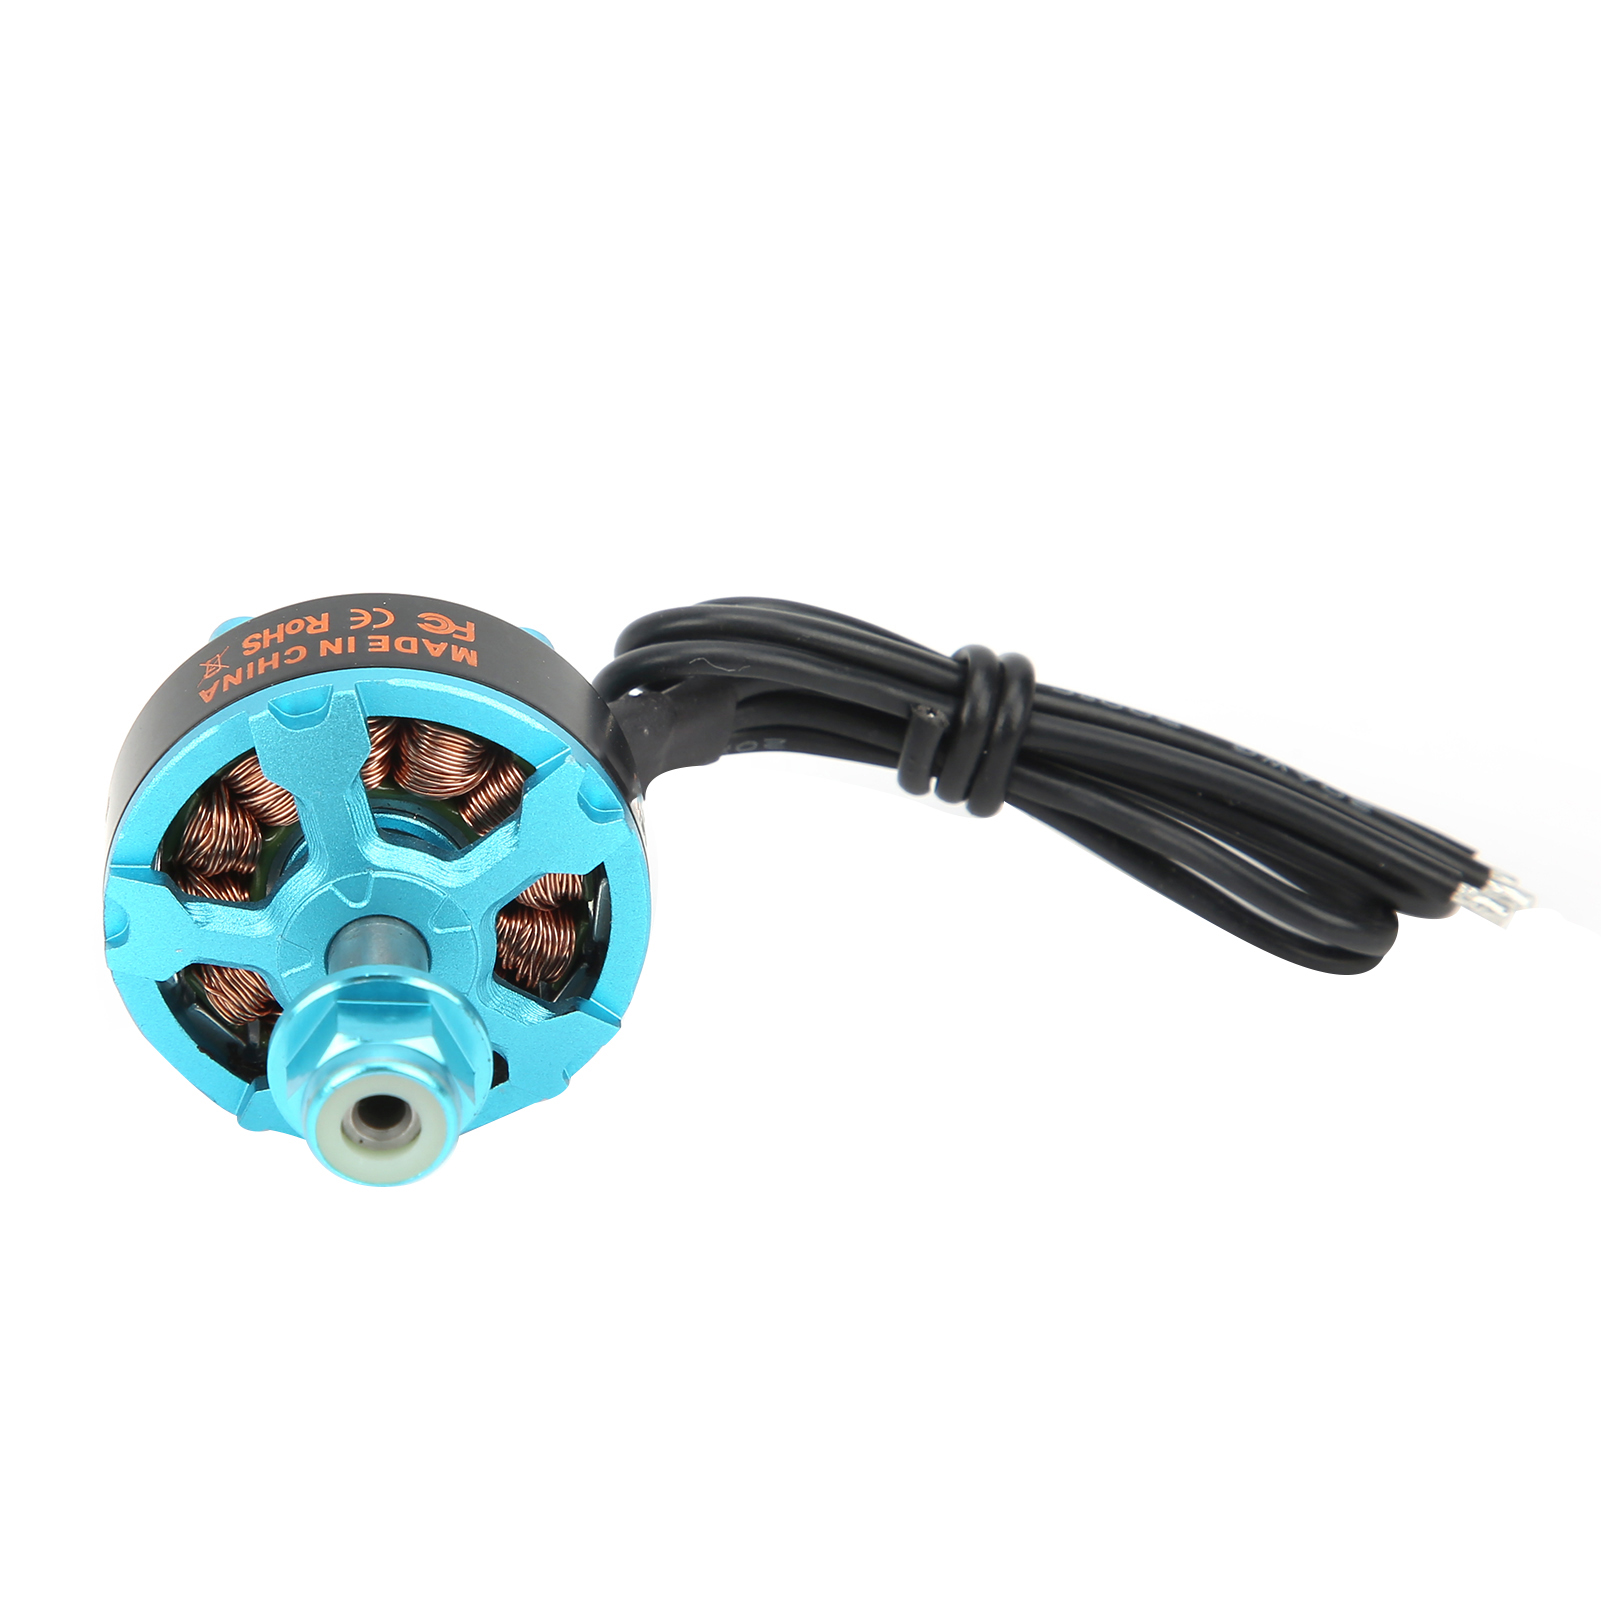 Metal Replacement Motor for RC Drone: Wu 2206